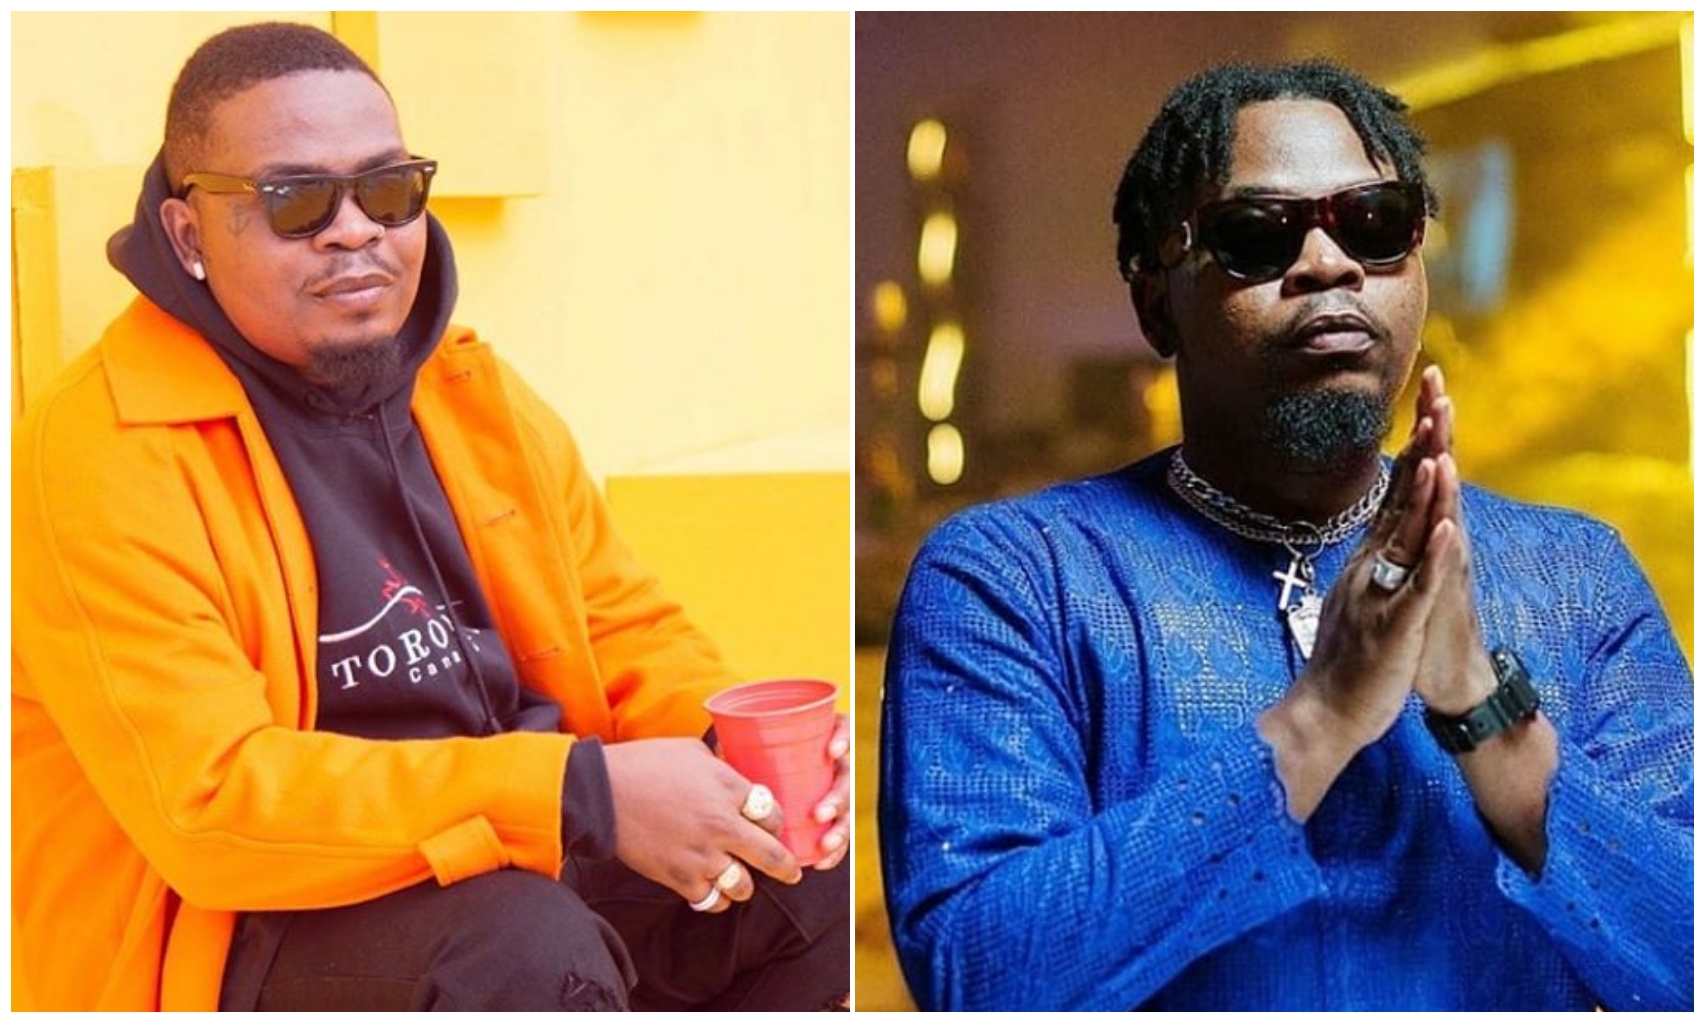 I’ve to stop restricting my creativity for my mental health - Olamide opens up